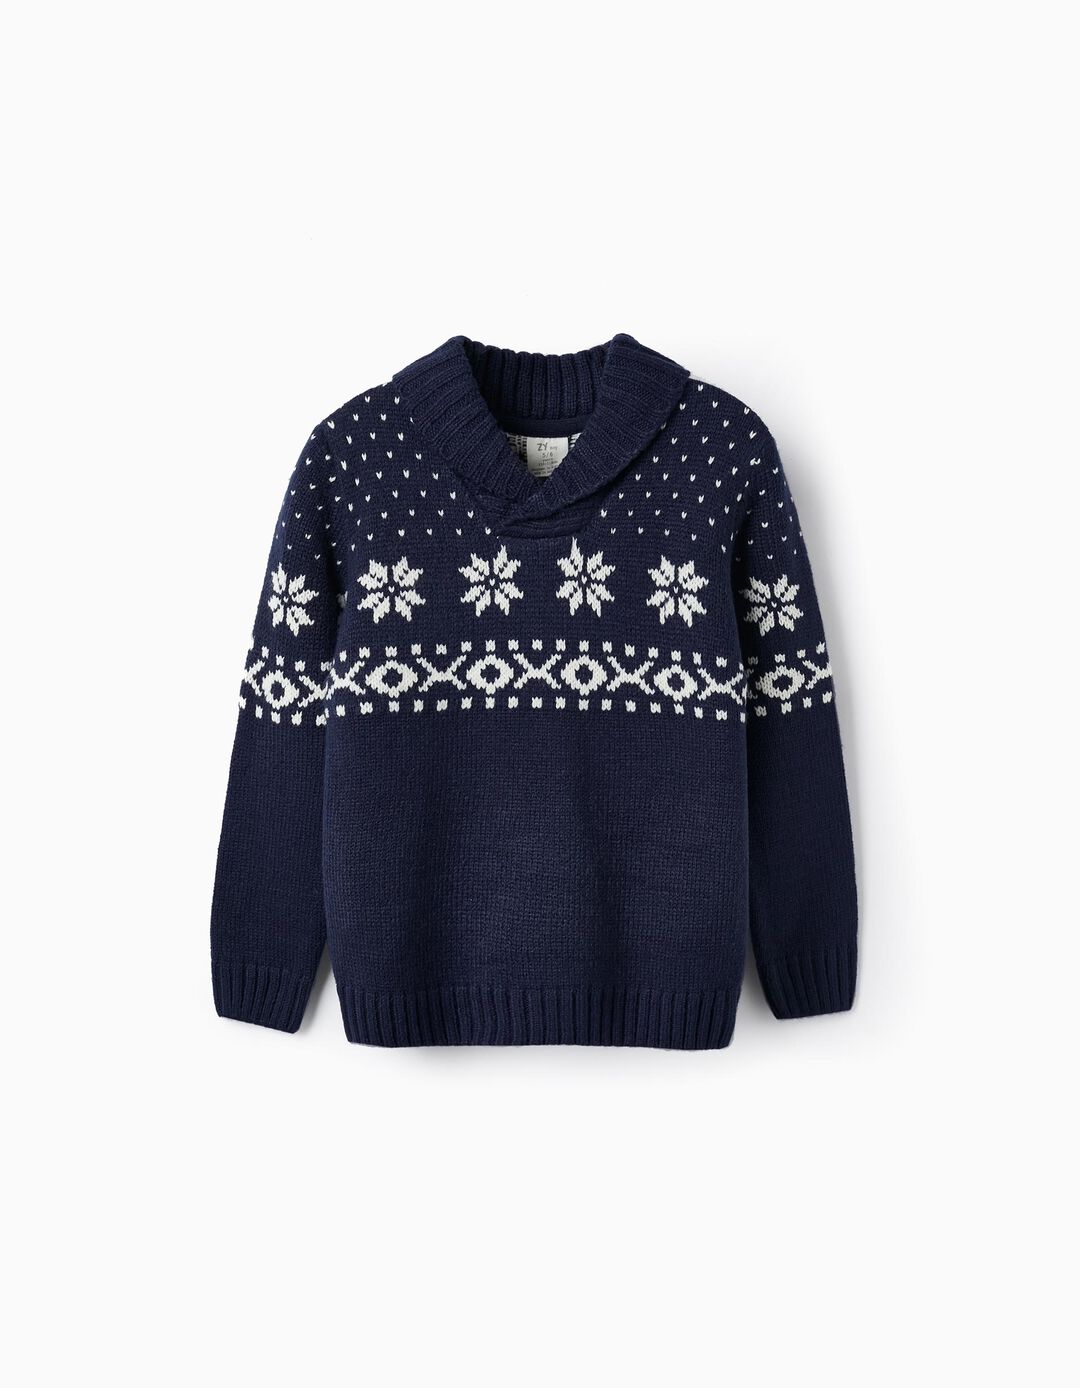 Thick Knit Jumper with Pattern for Boys, Dark Blue